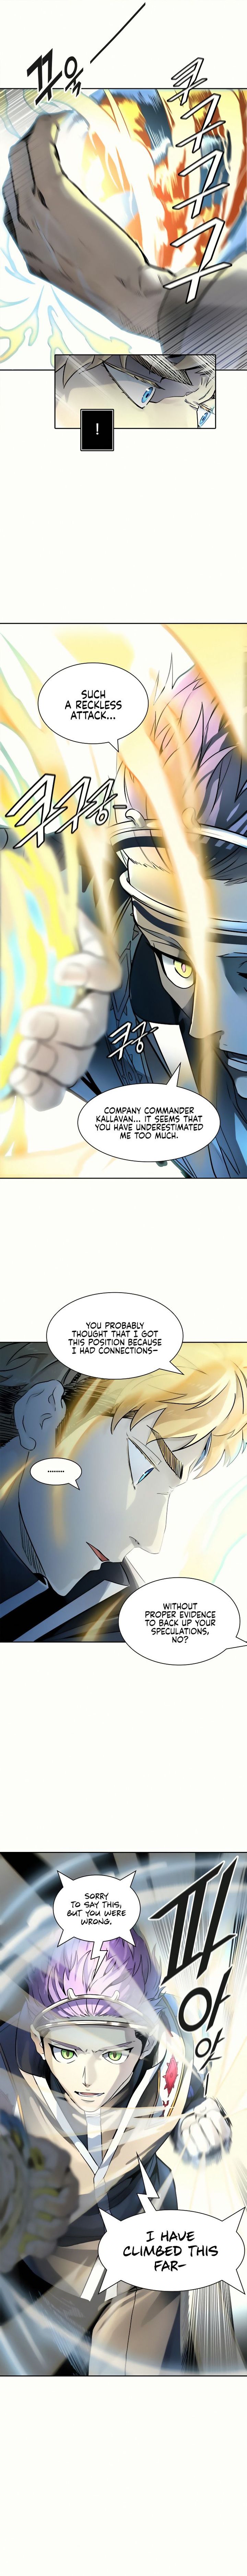 Tower Of God Chapter 521 Page 10